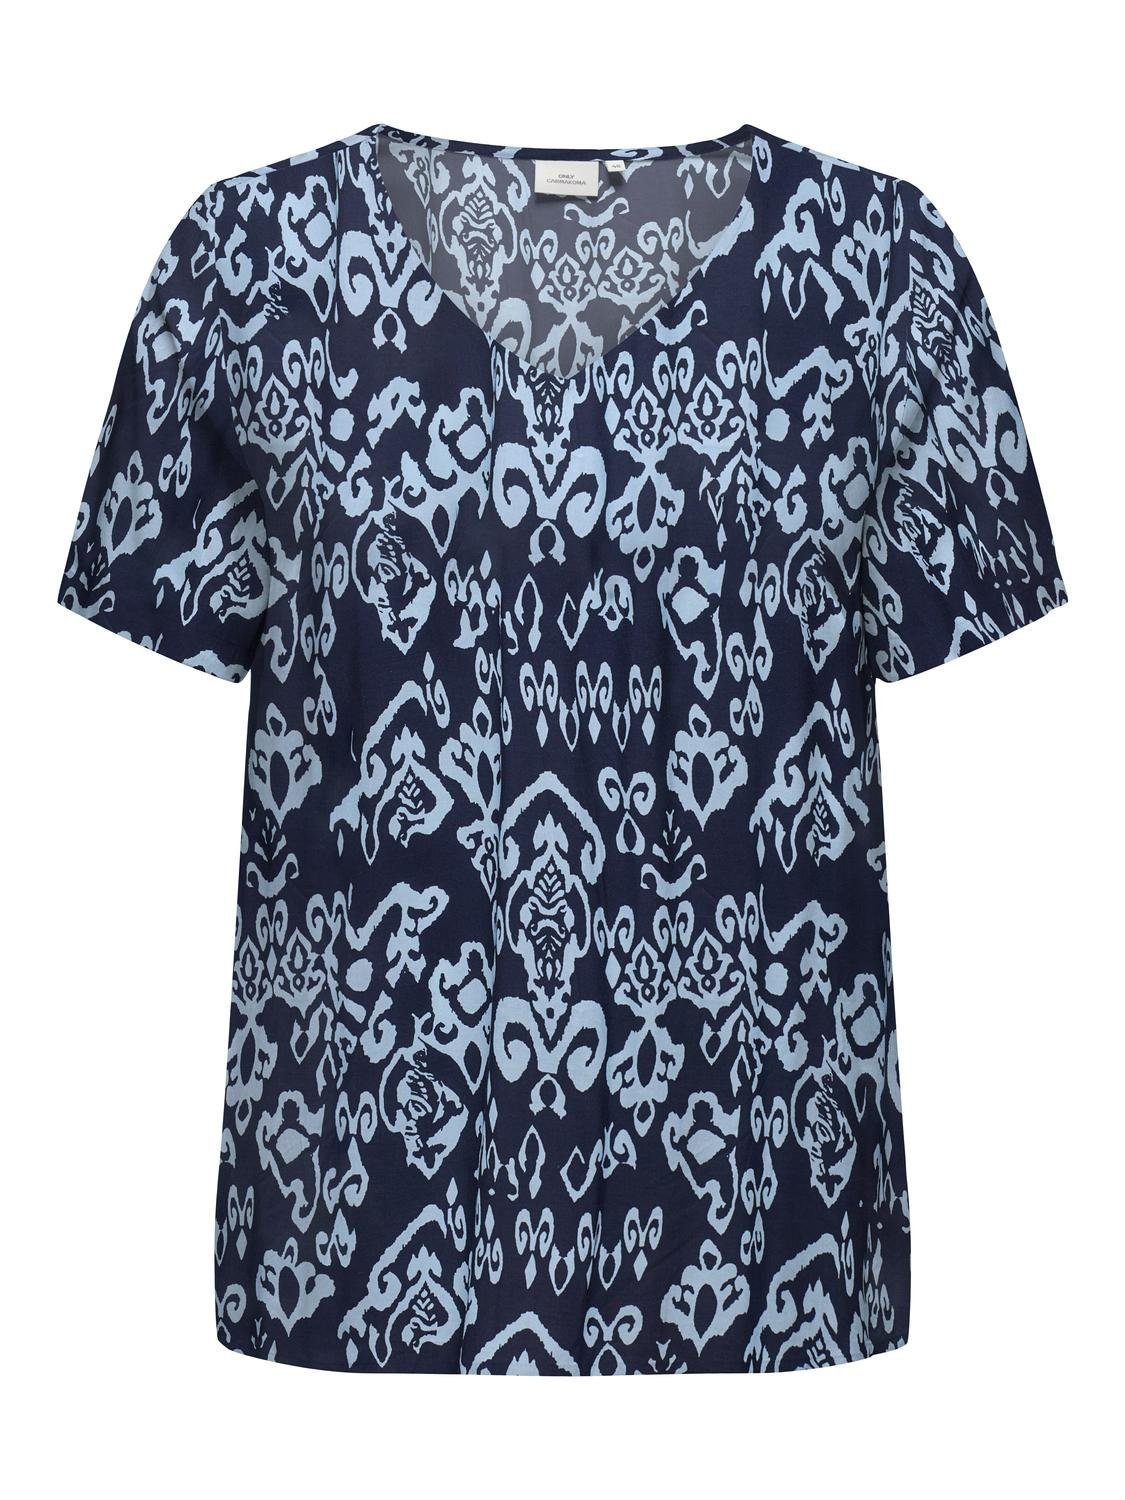 ONLY CARMAKOMA blousetop CARMARRAKESH met all over print donkerblauw lichtblauw